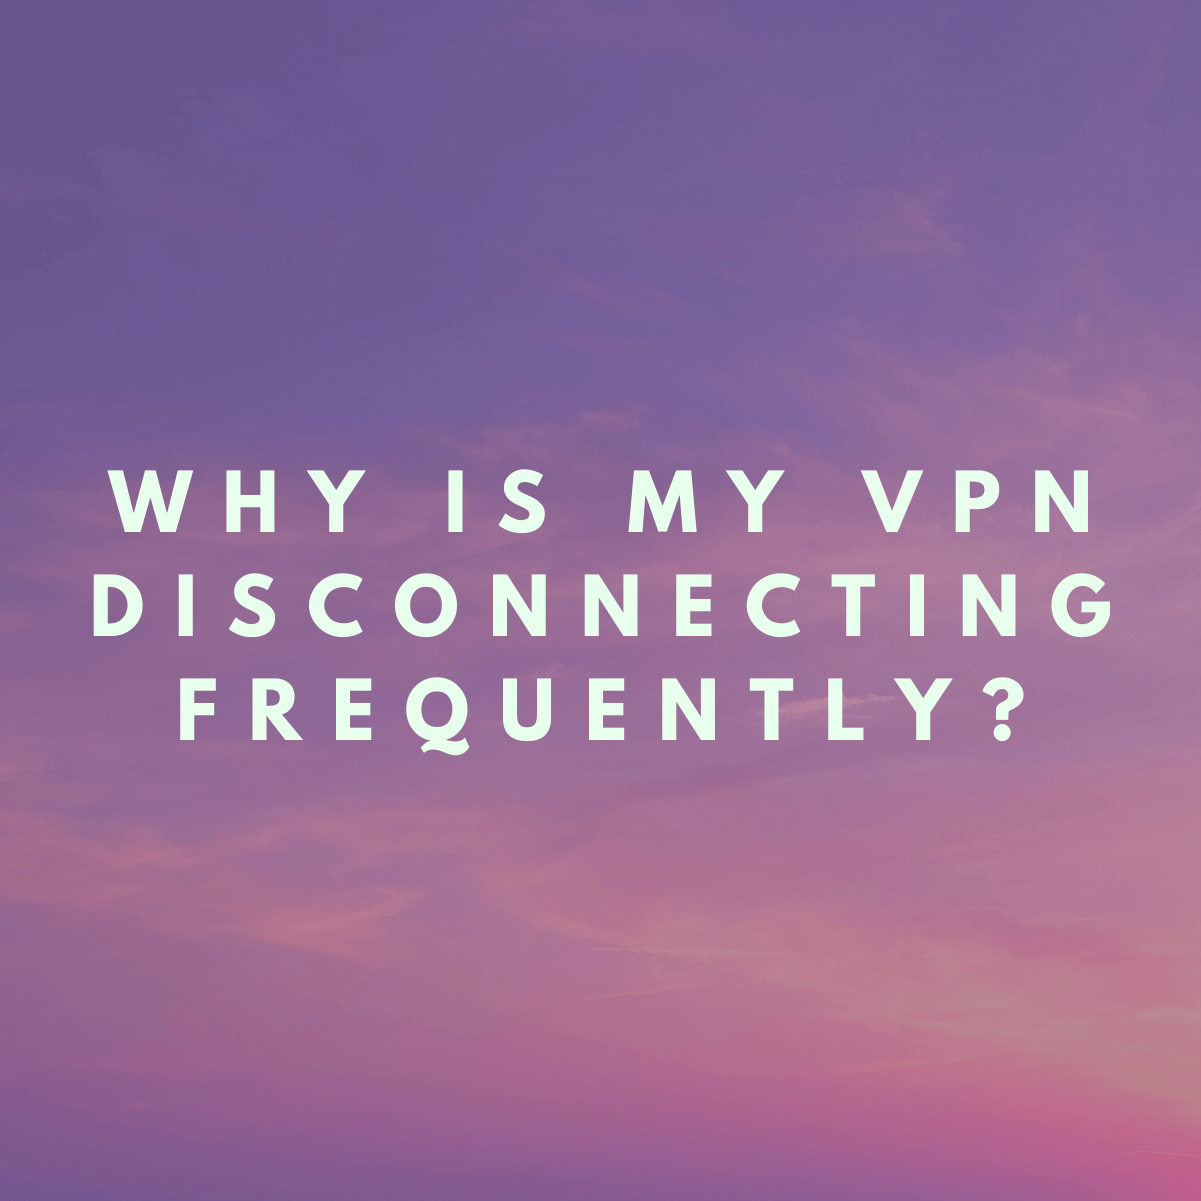 vpn-disconnecting-frequently